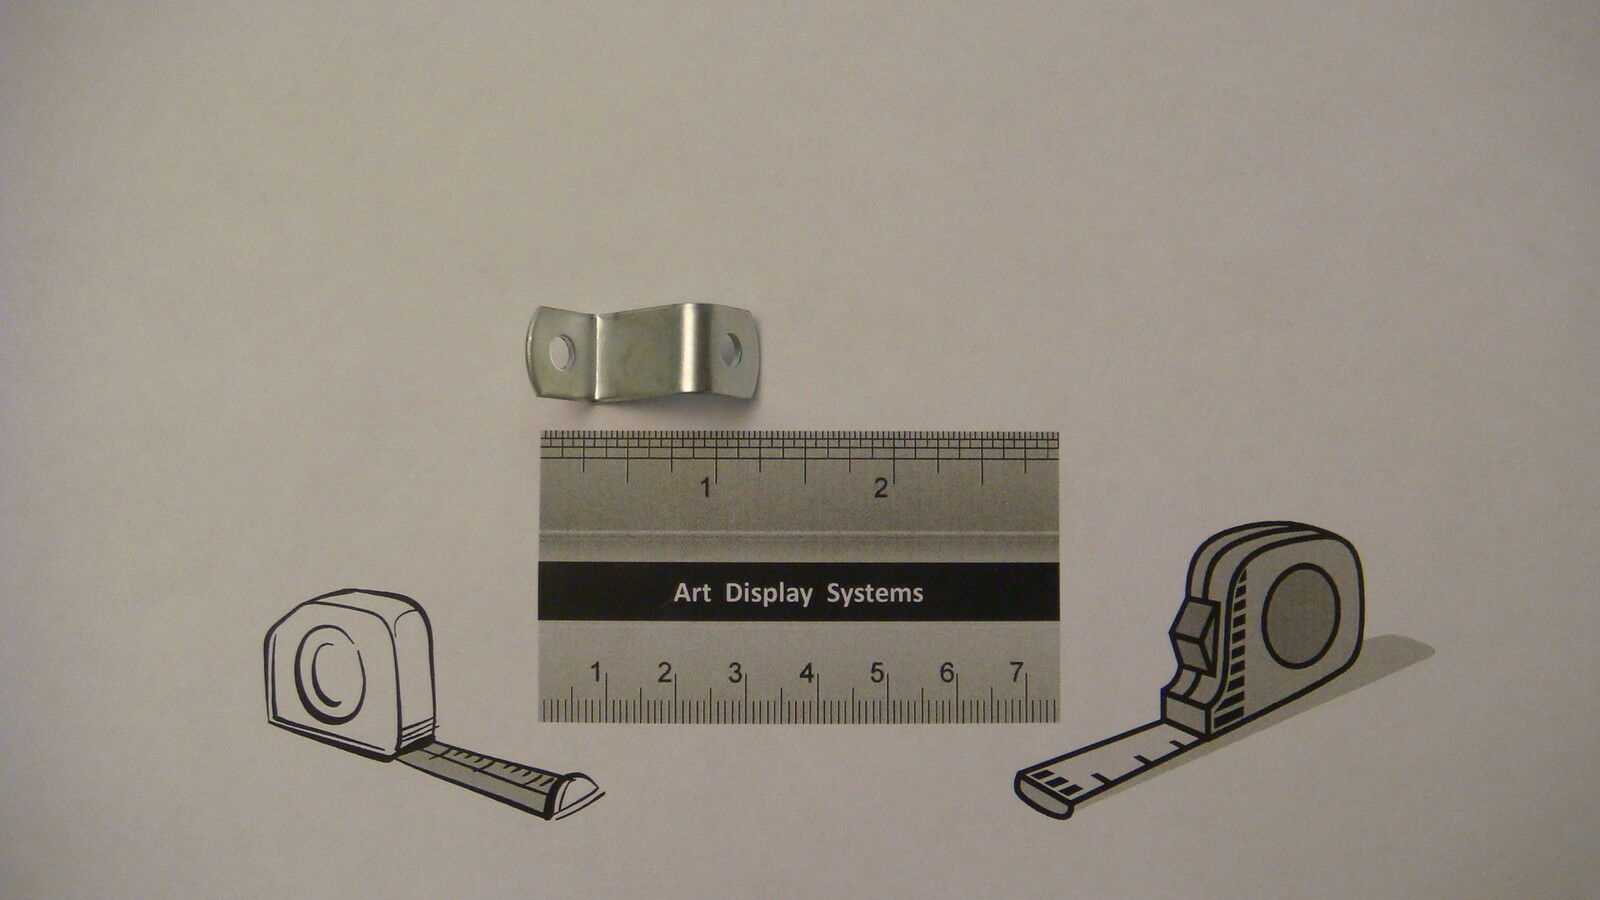 10 Canvas Offset Clips 3/4" Picture Framing Crafts 20 #6 1/2" Screws + Samples